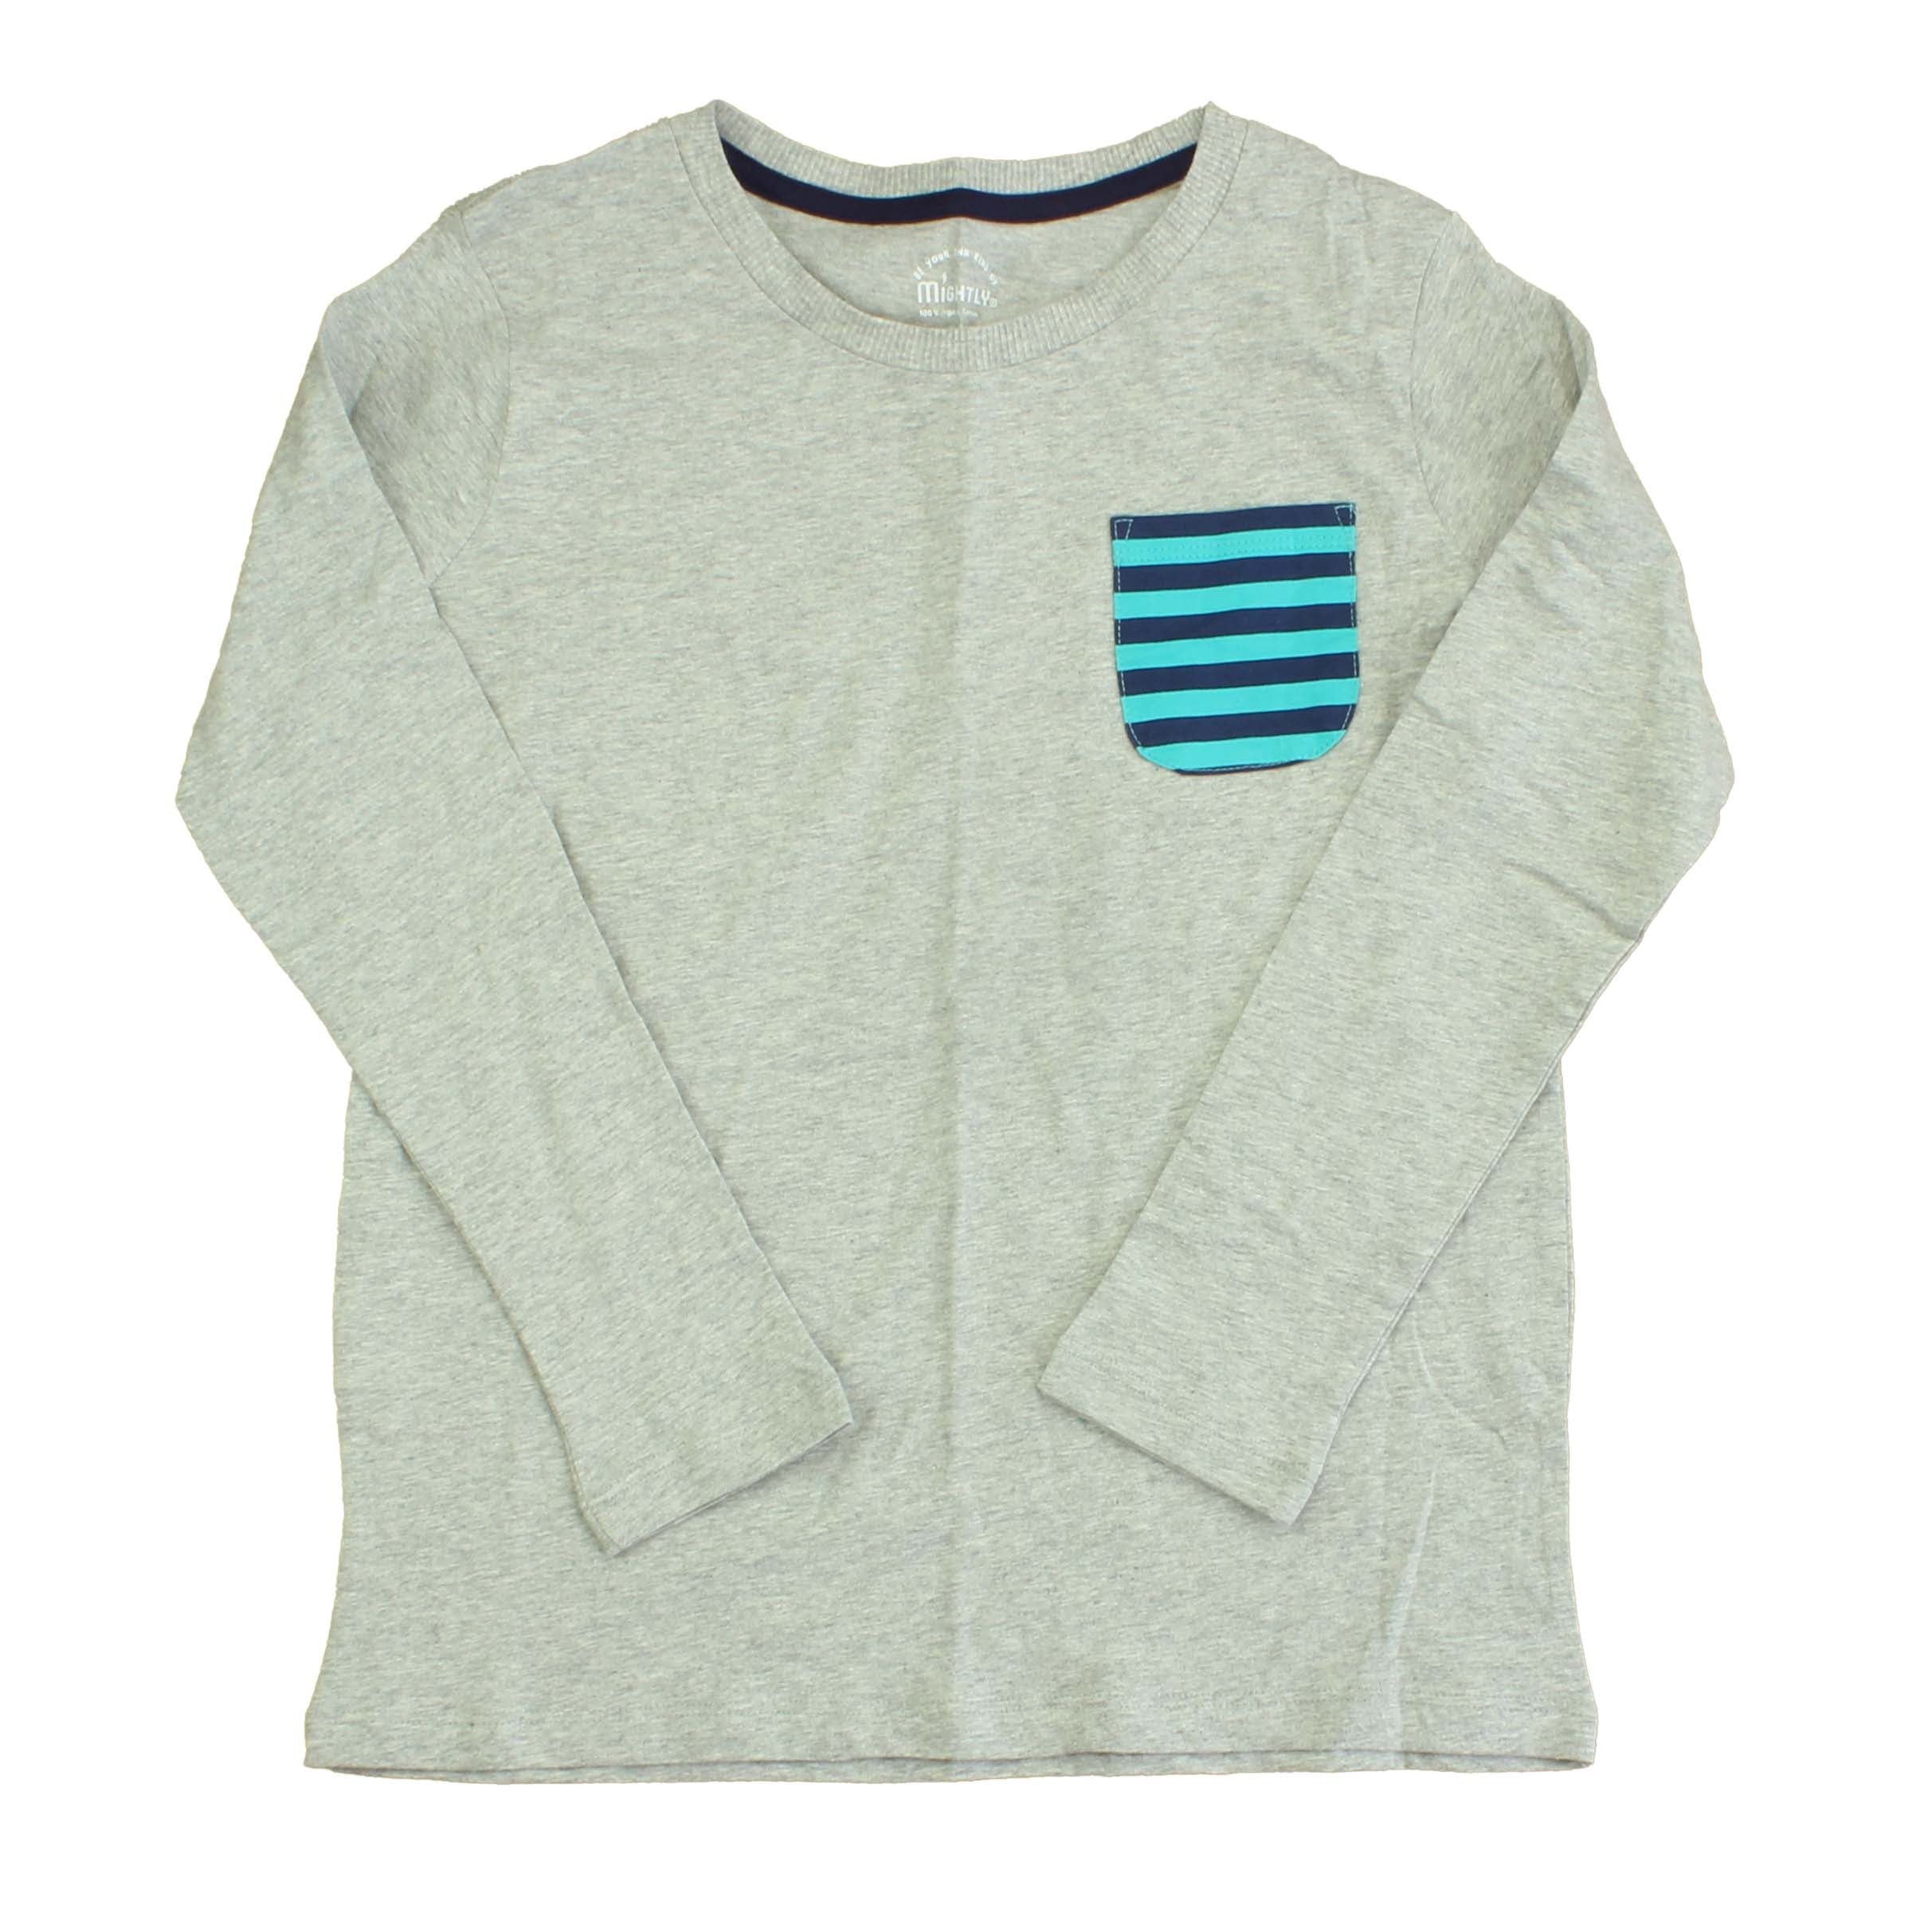 Pre-owned Grey | Turquoise | Stripes T-Shirt size: 12 Years